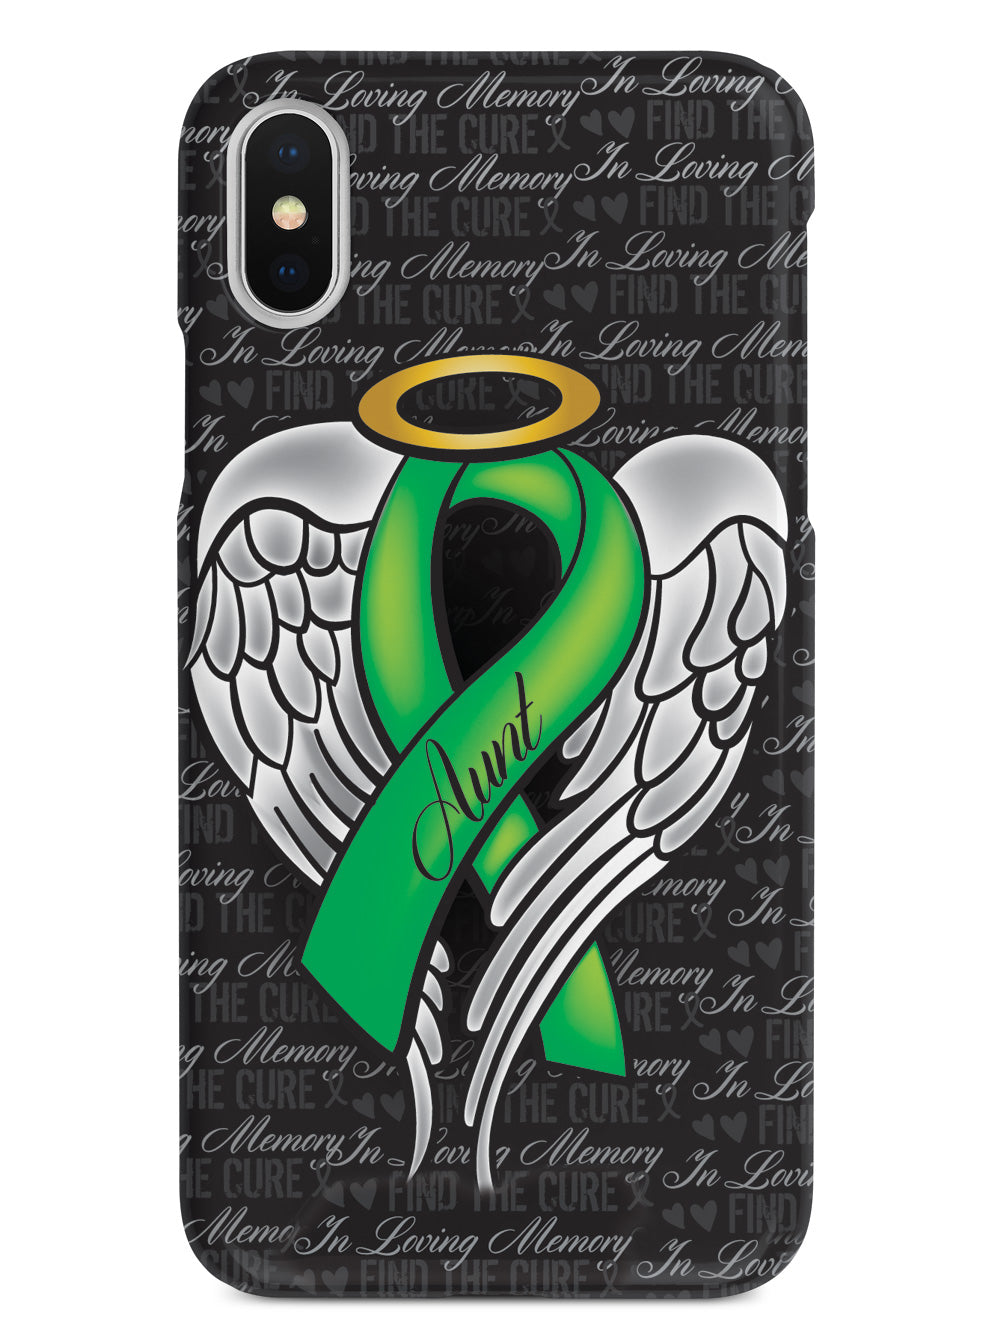 In Loving Memory of My Aunt - Green Ribbon Case